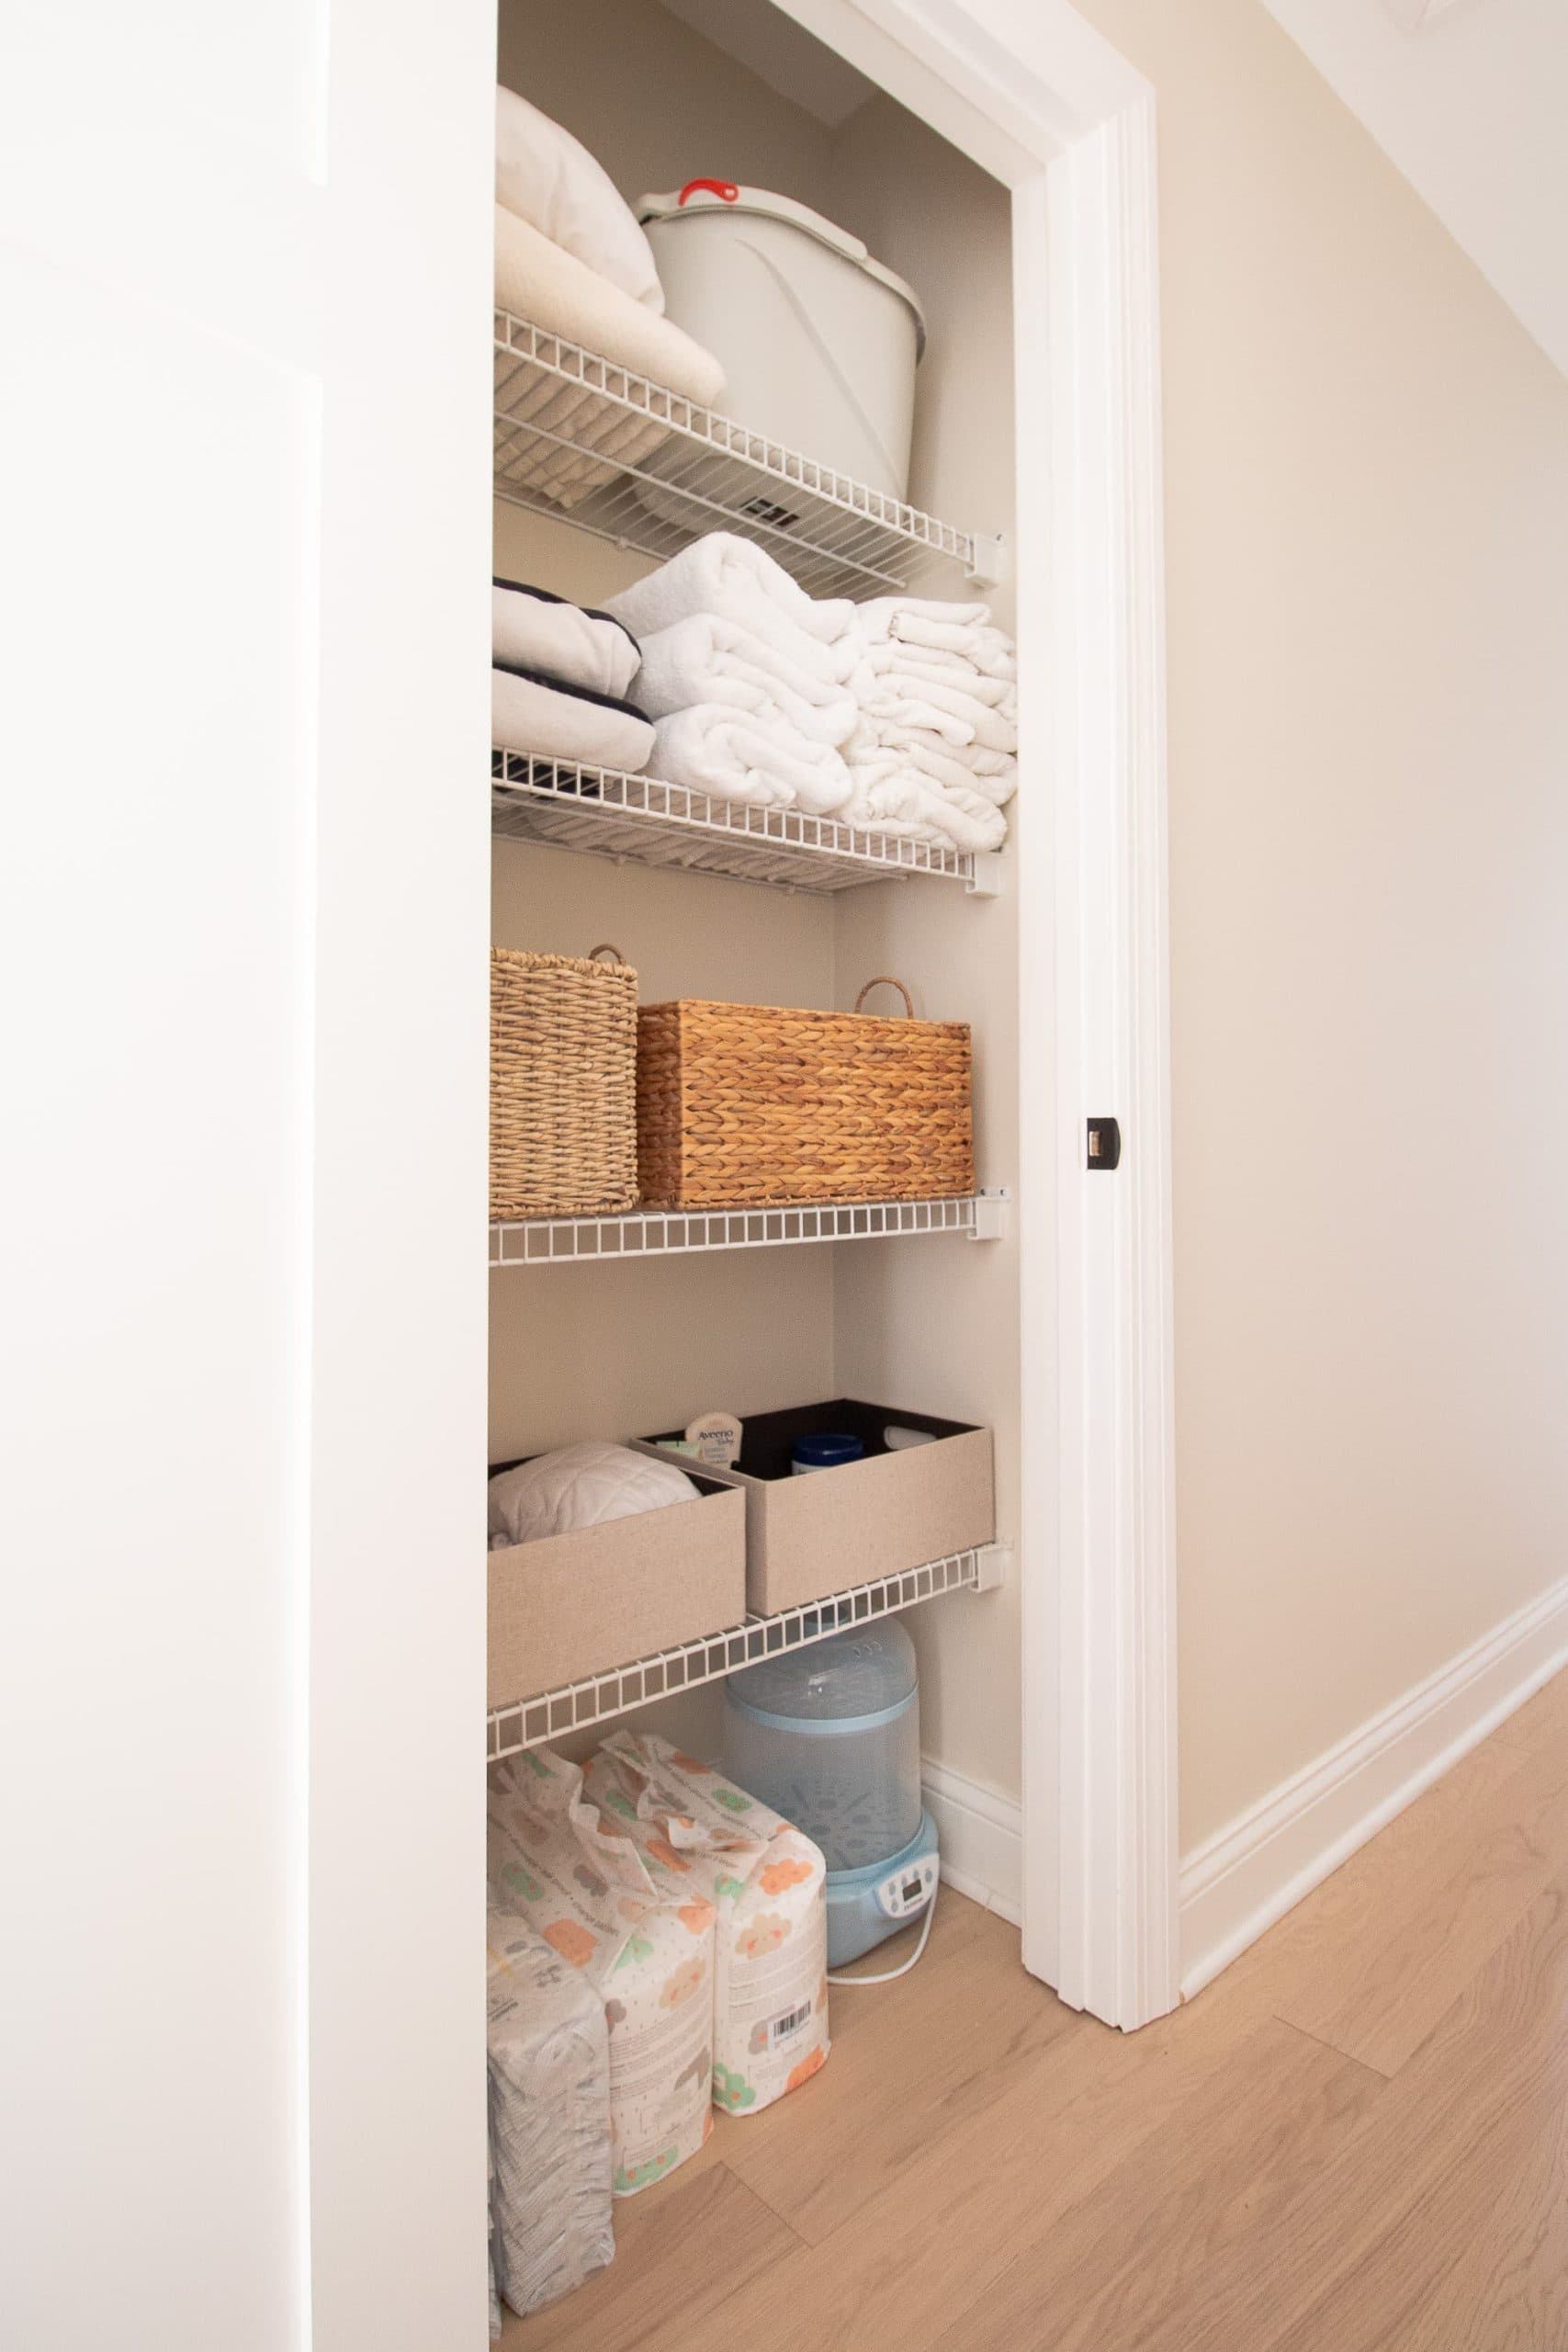 Sprucing up our linen closet